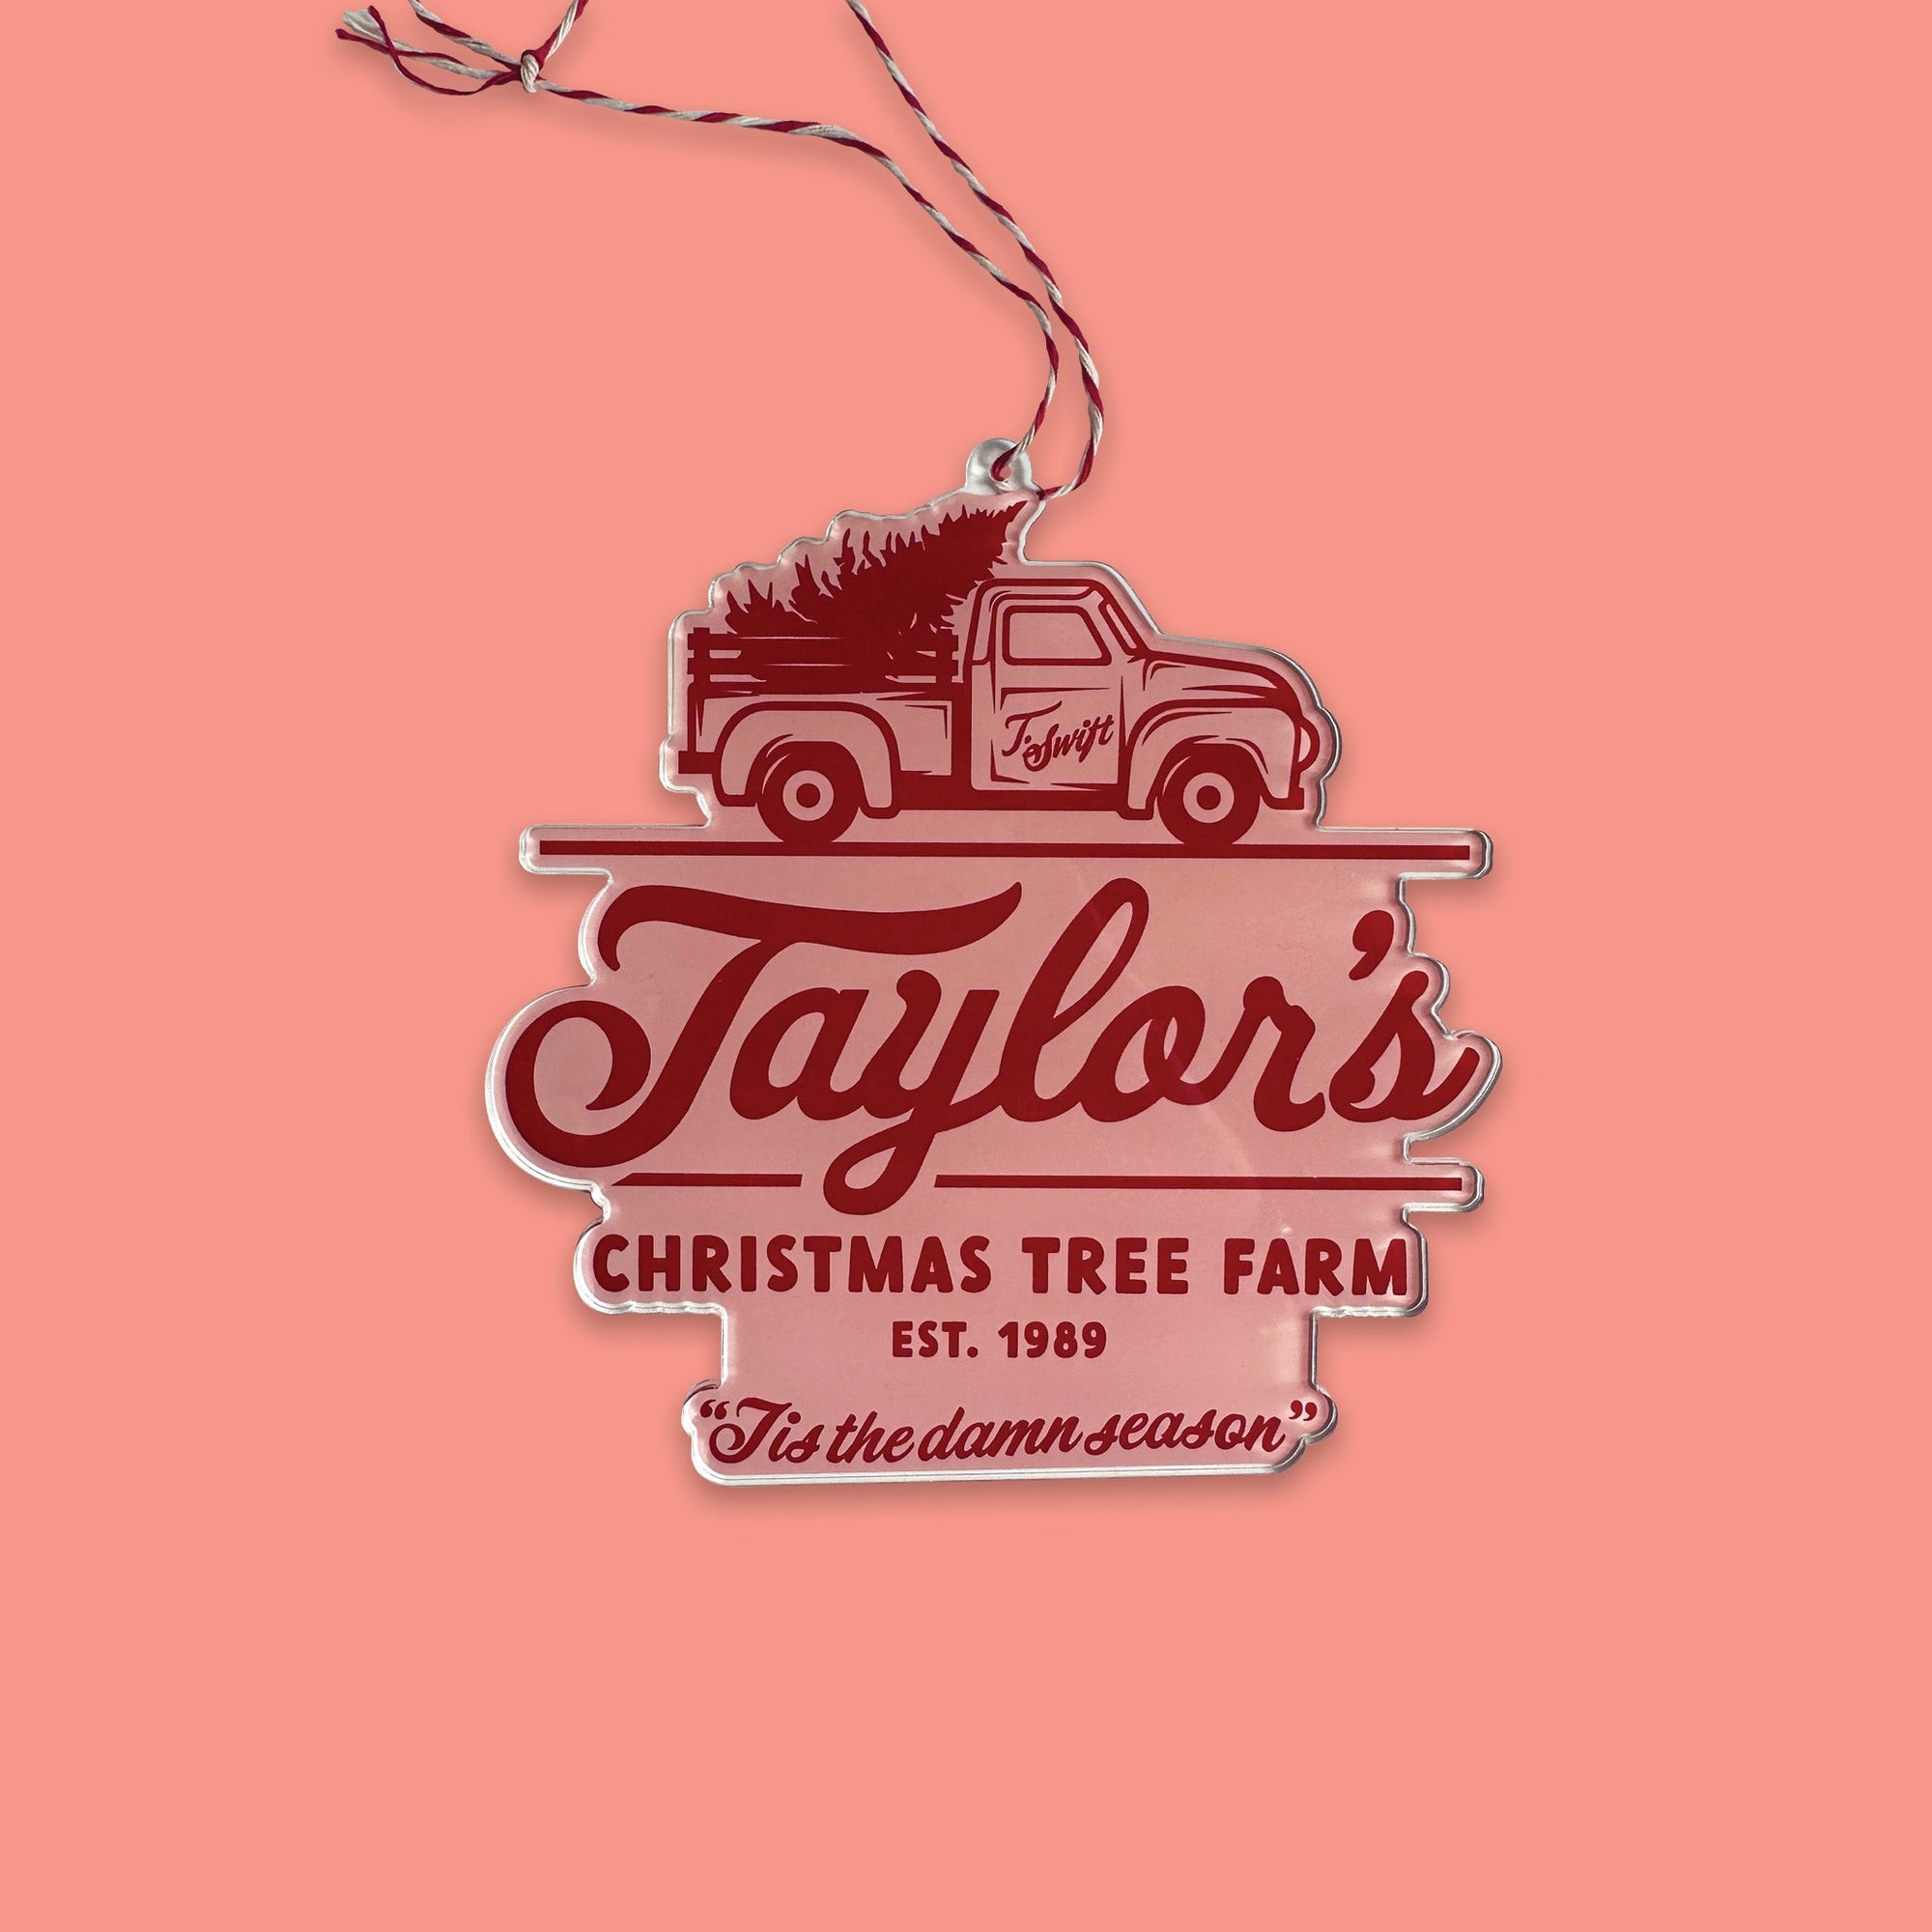 On a coral pink background sits an acrylic ornament with red and white string. This Taylor Swift inspired ornament has a red vintage truck with a tree and it says "Taylor's CHRISTMAS TREE FARM EST. 1989" in hand lettering and it also says "Tis the damn season" in red hand lettering at the bottom. It has a pink background.